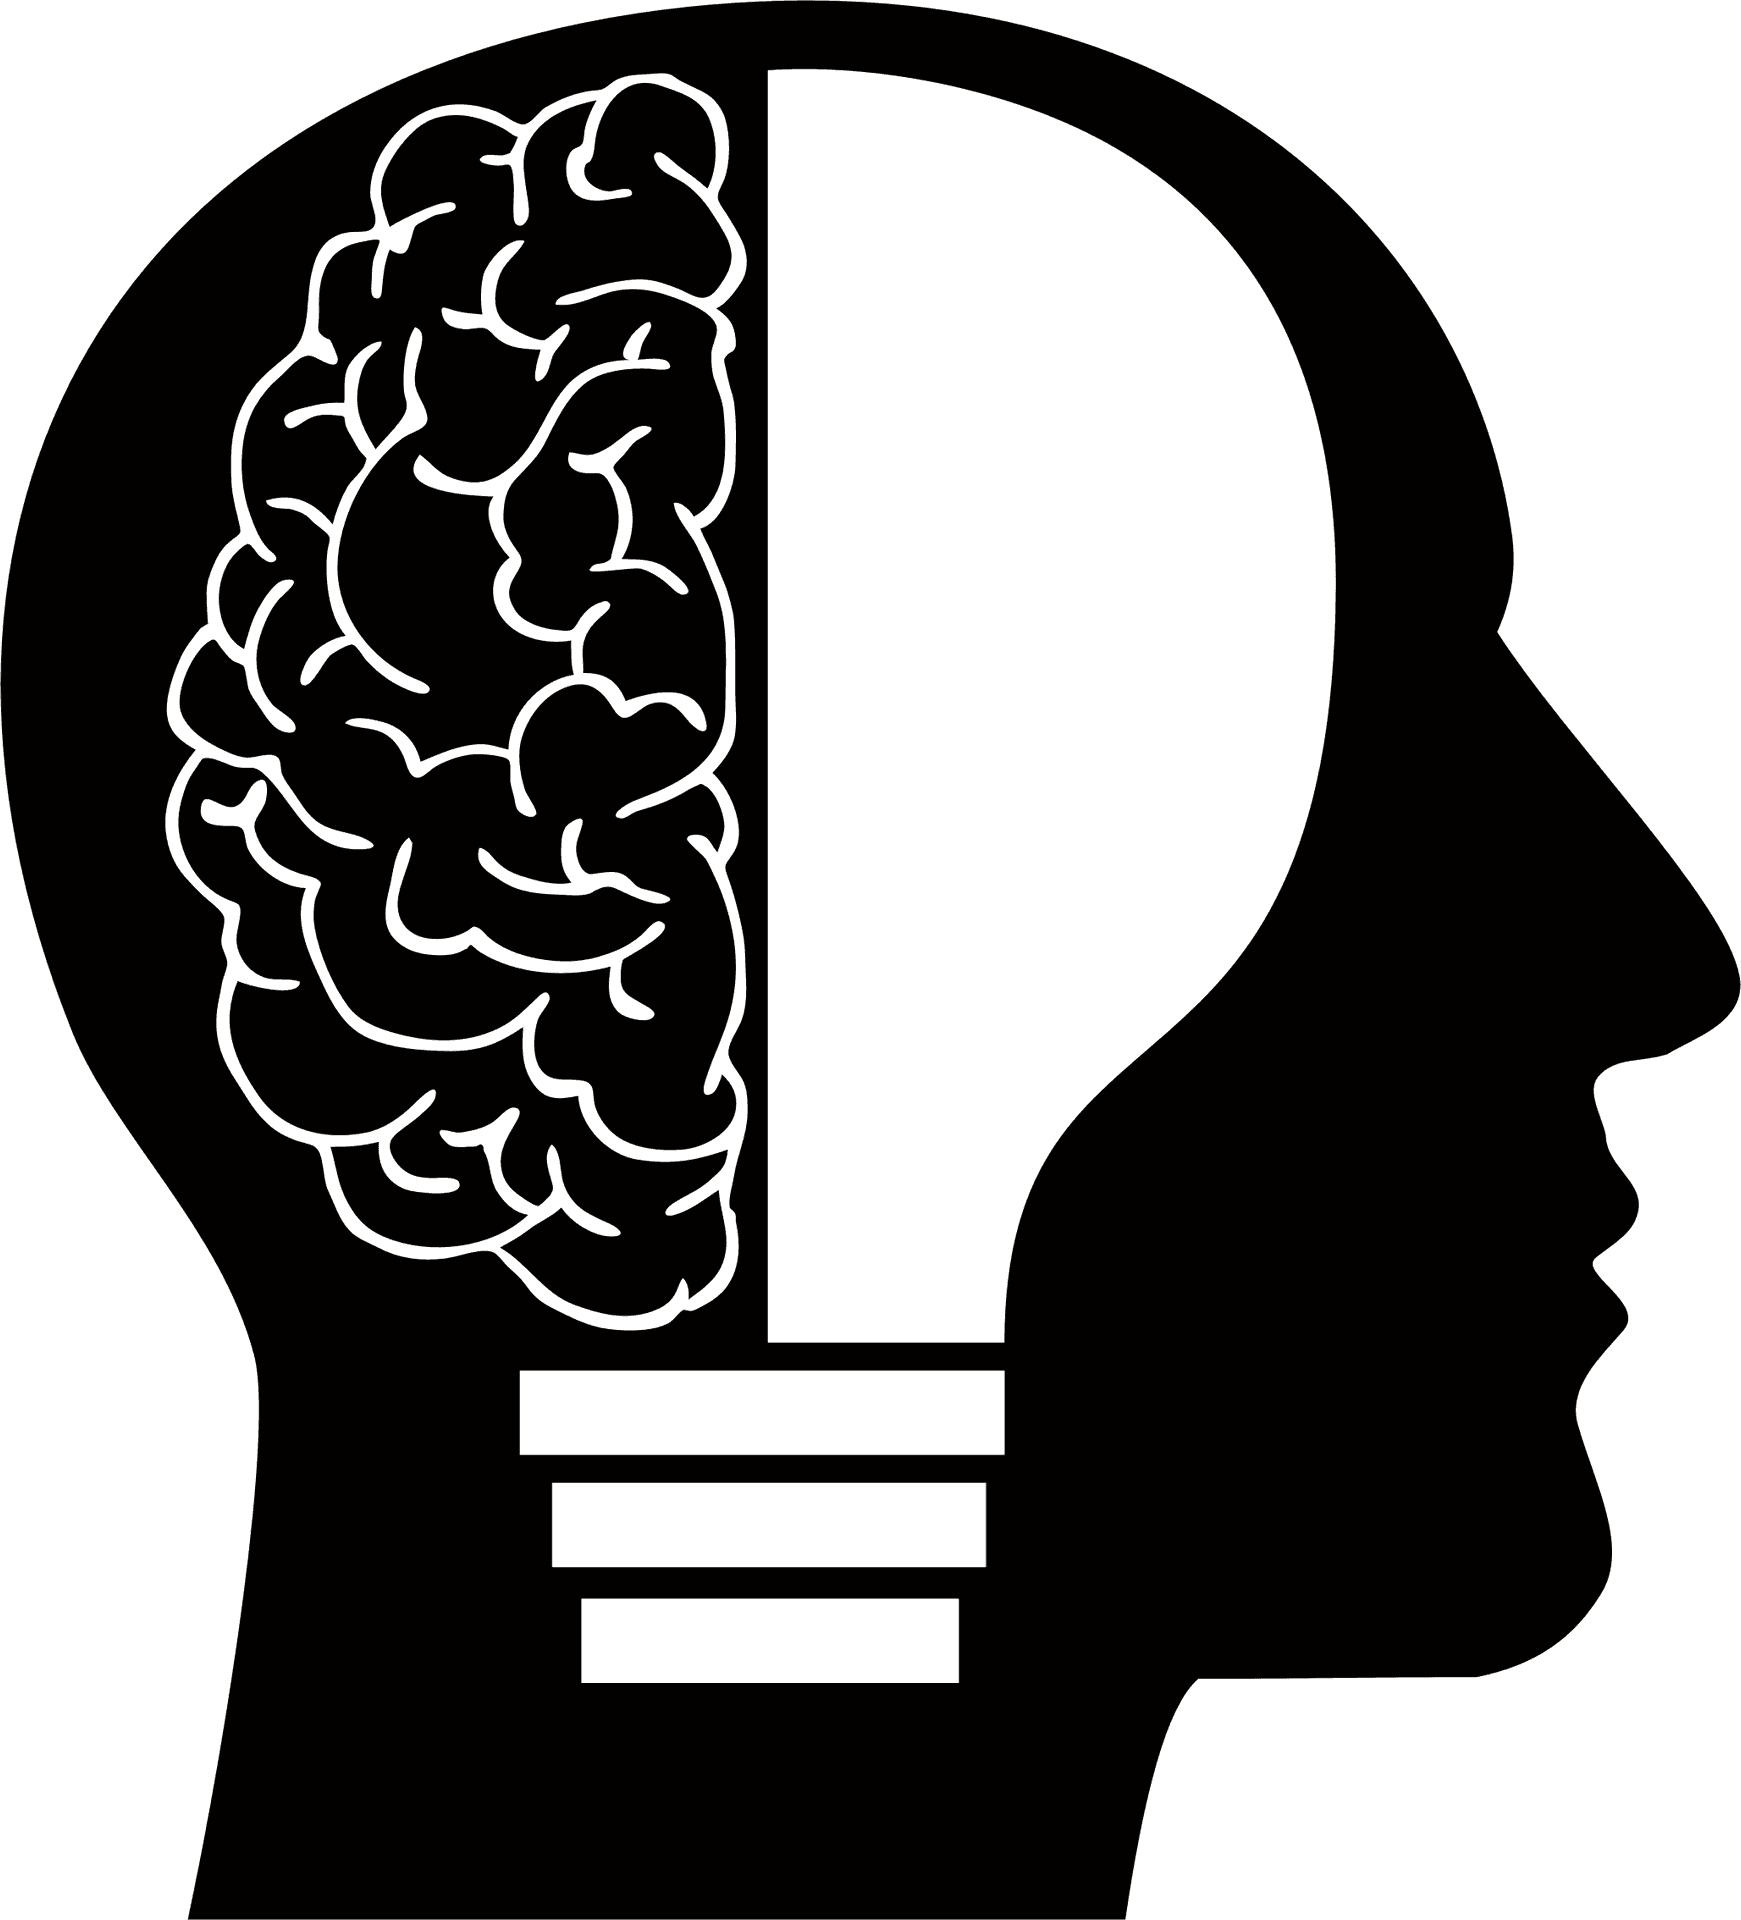 Human Brain Outline Graphic PNG image